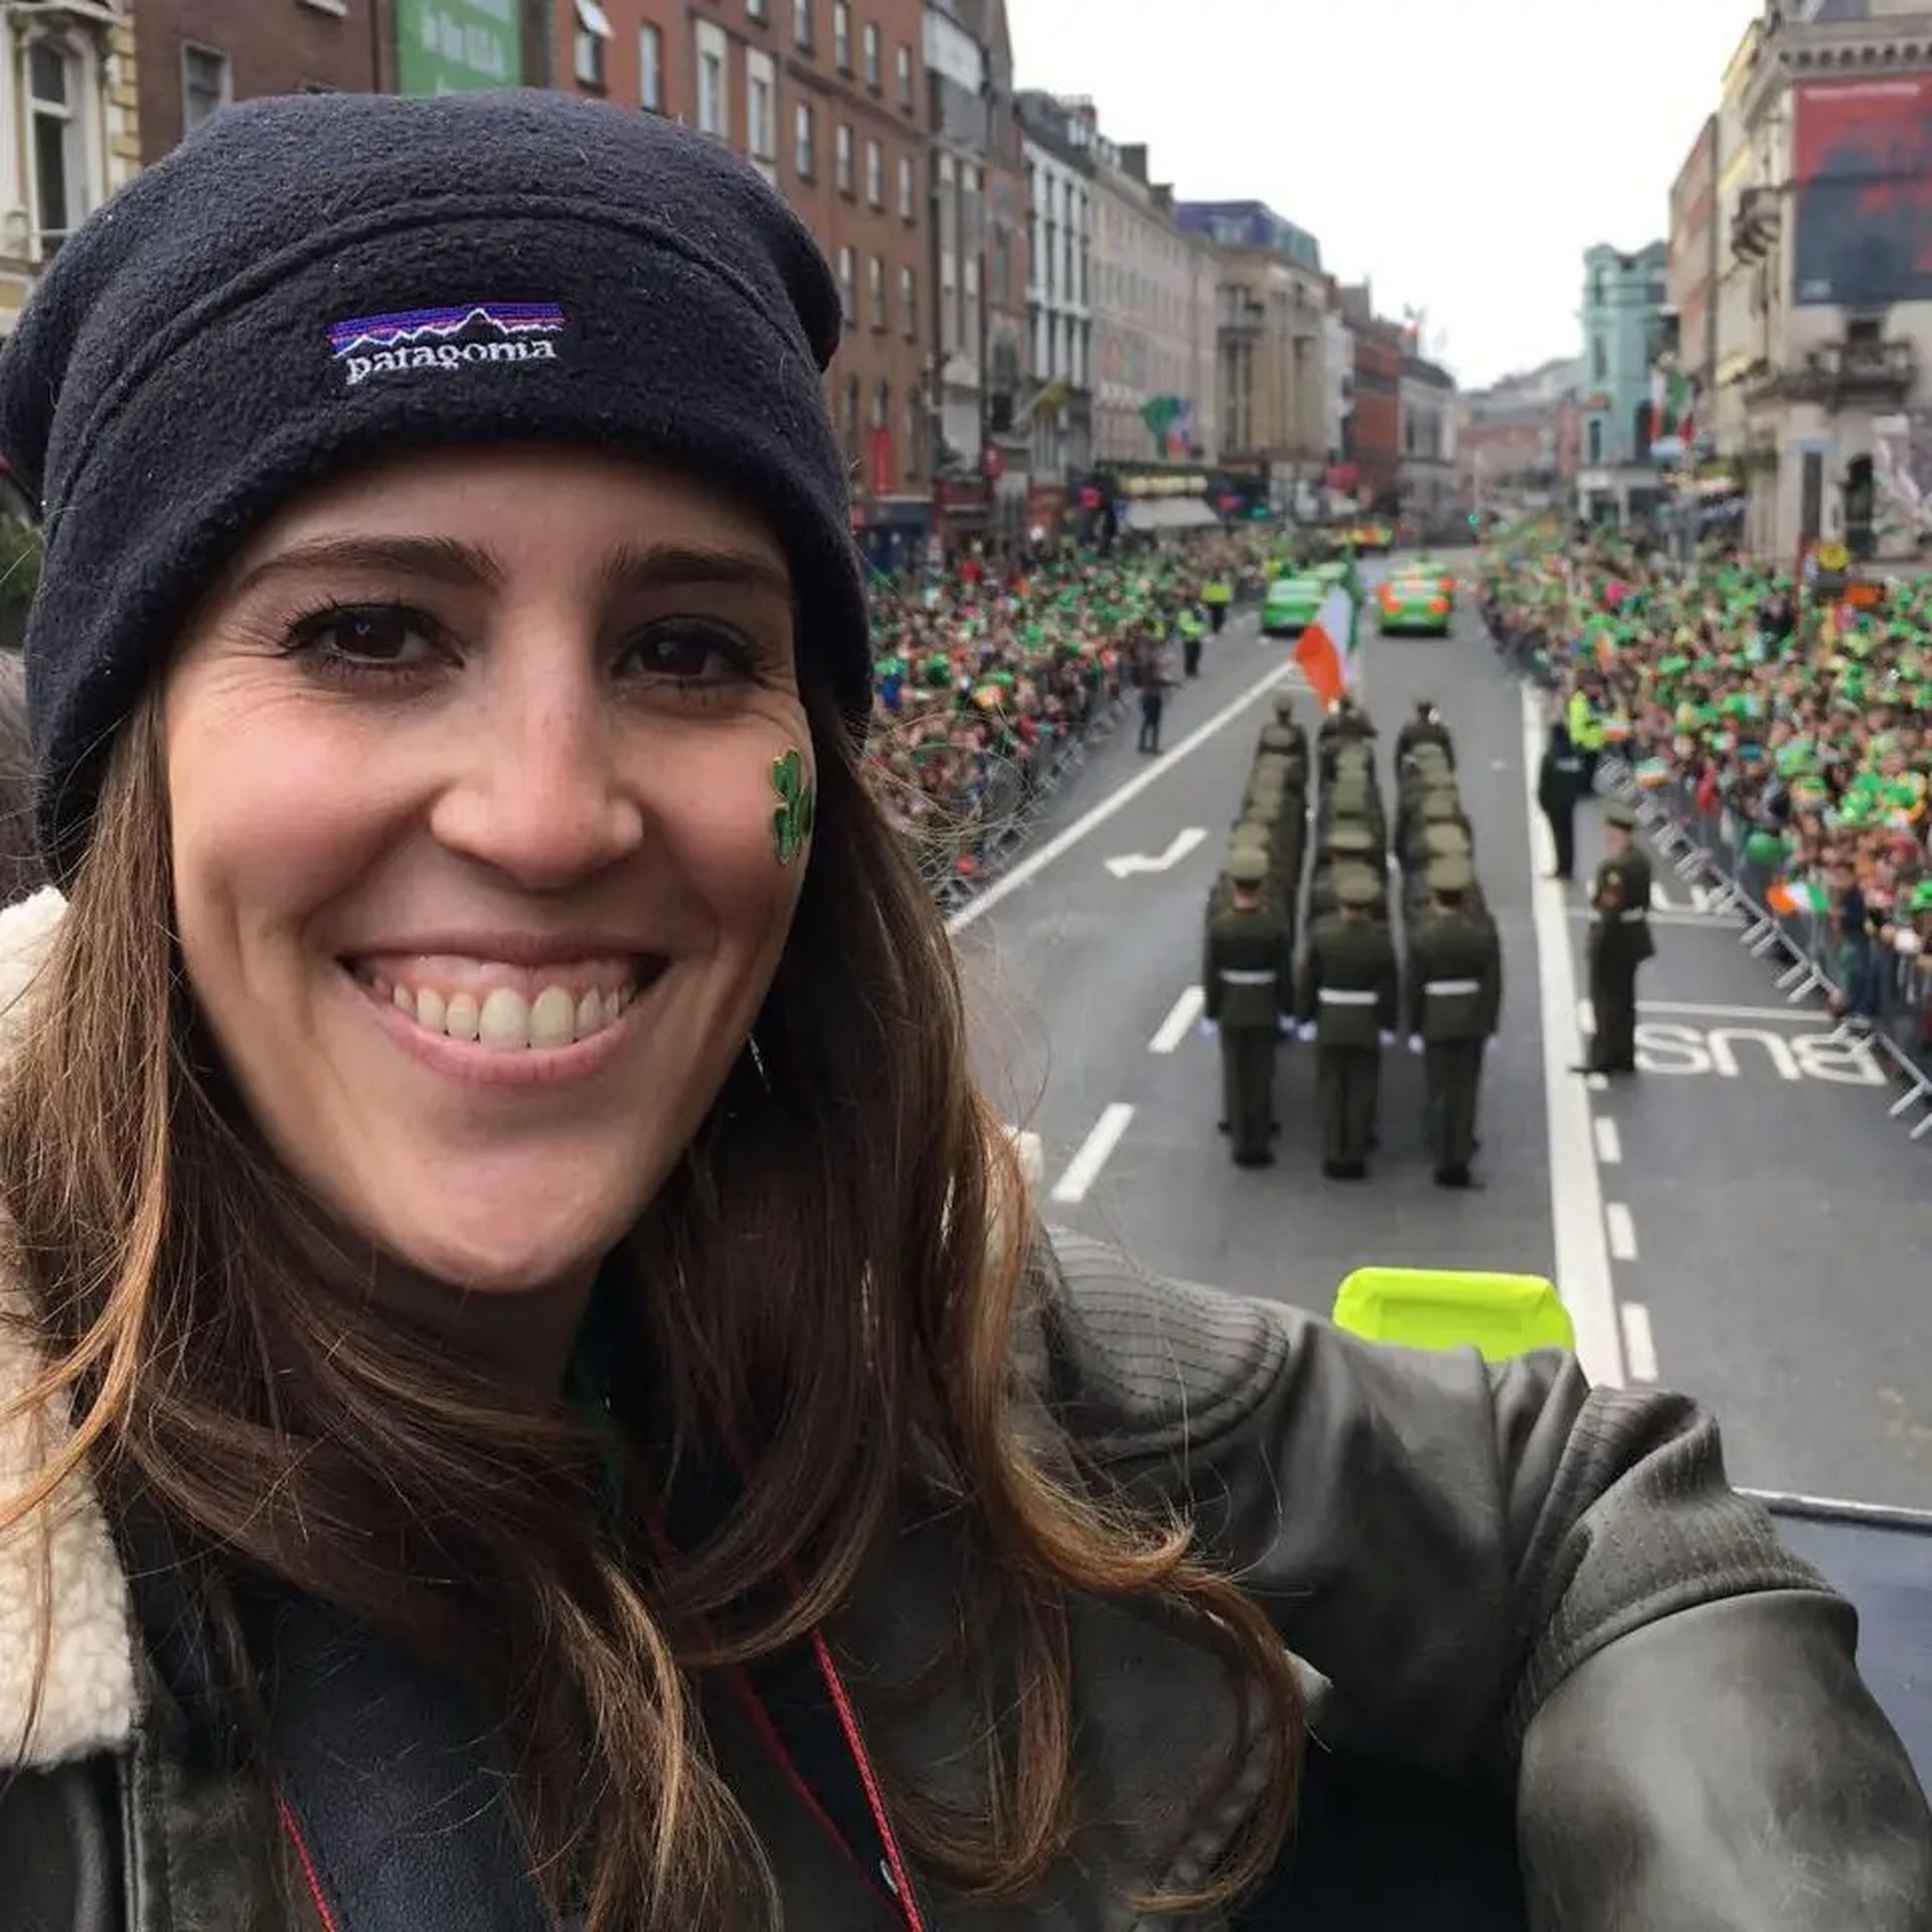 Michelle Gross at a parade in Ireland.